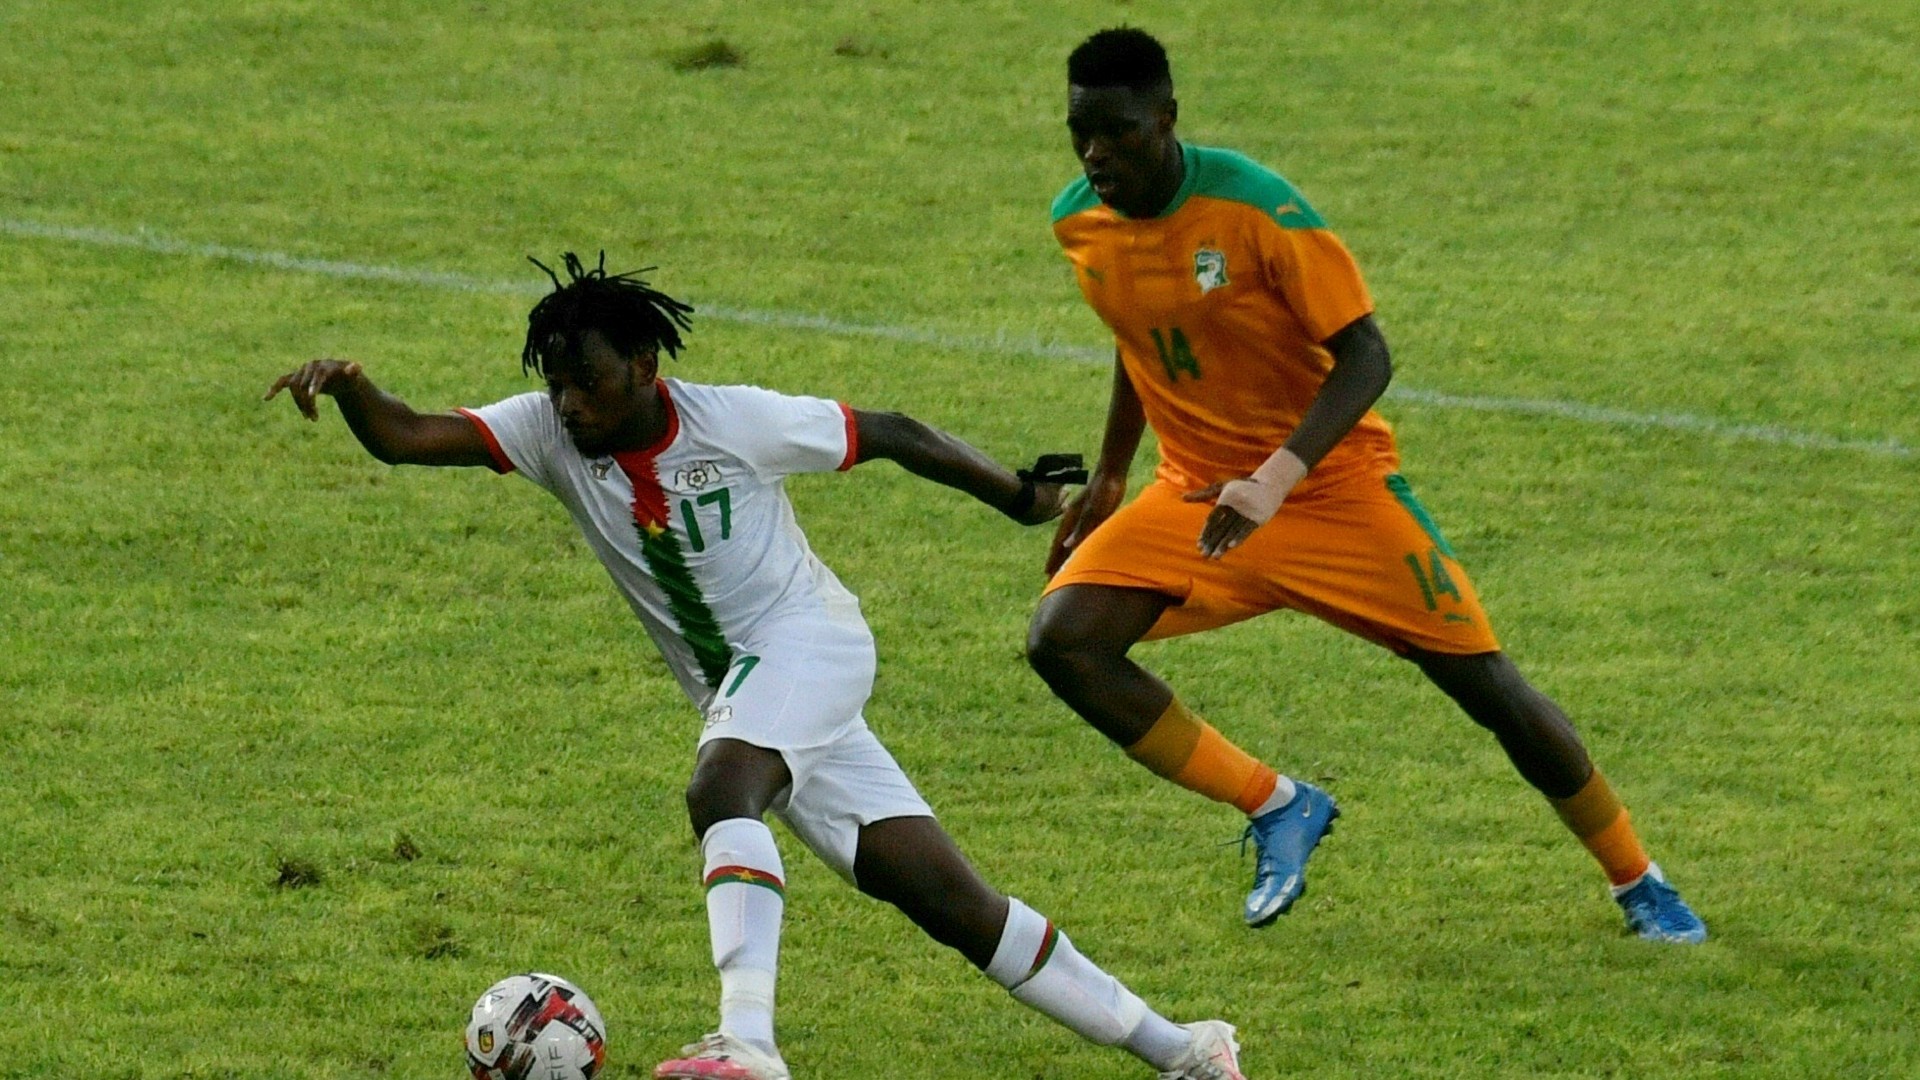 Olympics 2020: ‘Cote d’Ivoire have a team with quality’ – Torino’s Singo talks up Elephants’ chances